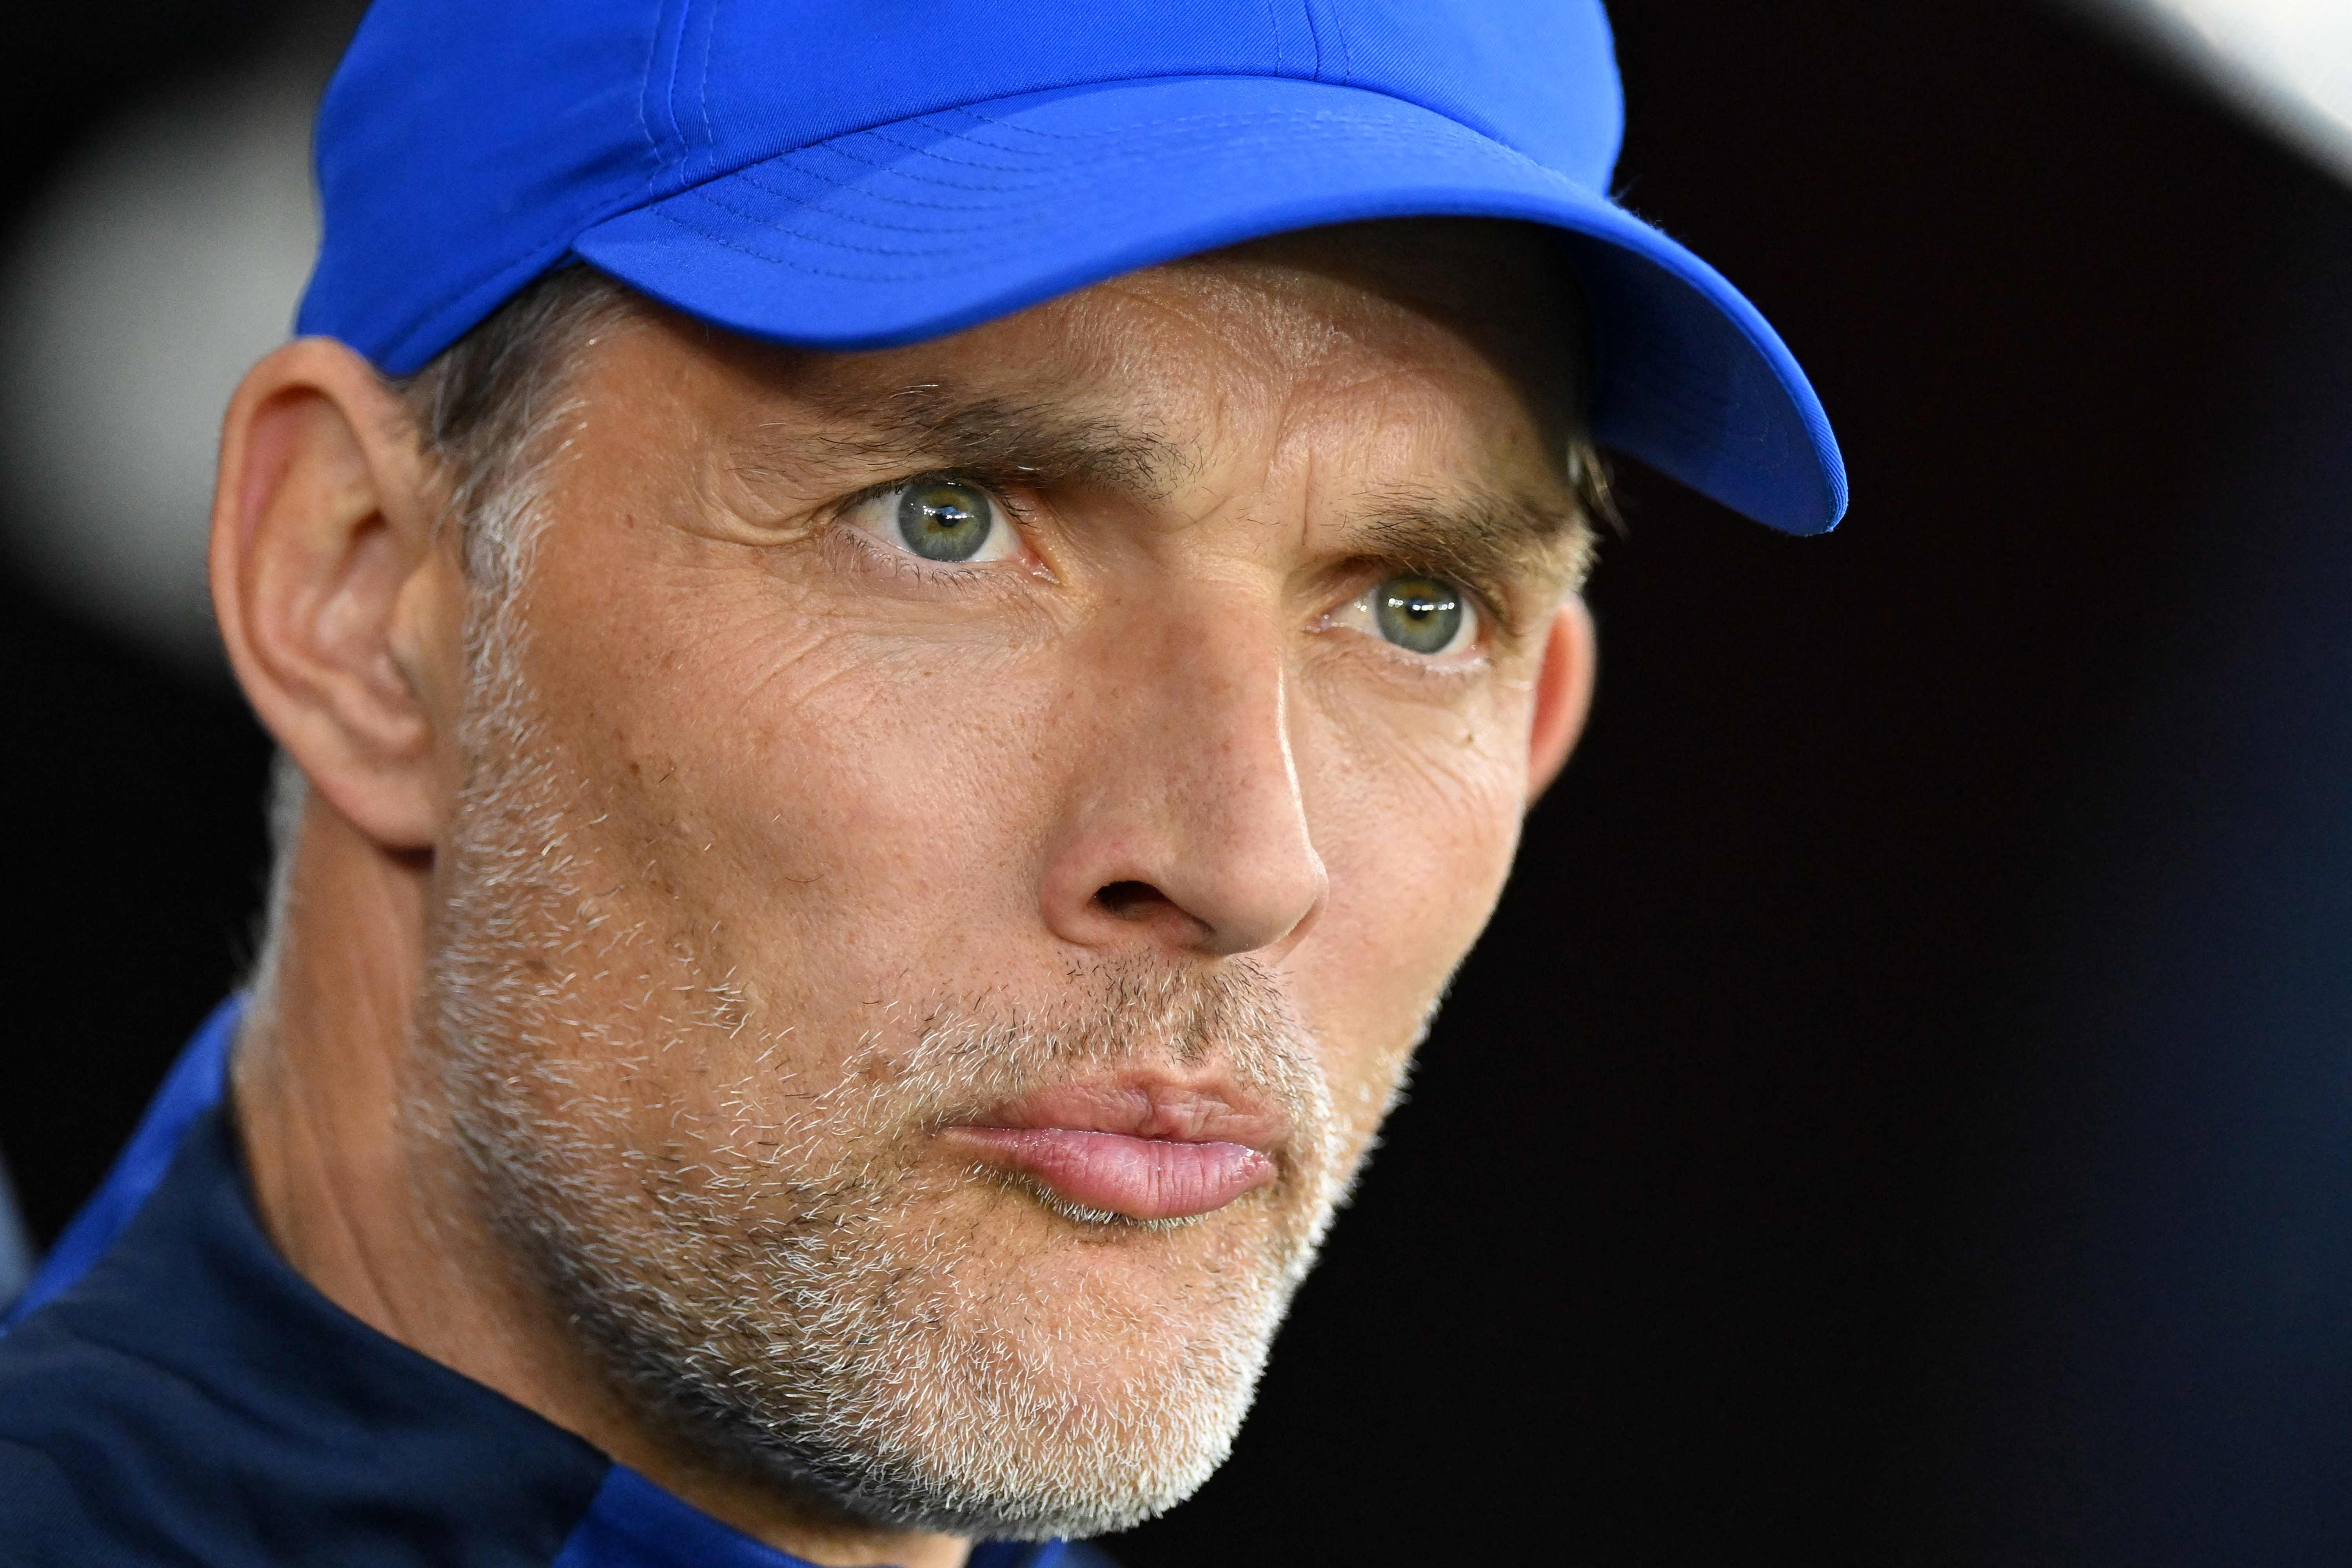 Thomas Tuchel is back in work after being sacked by Chelsea earlier this season